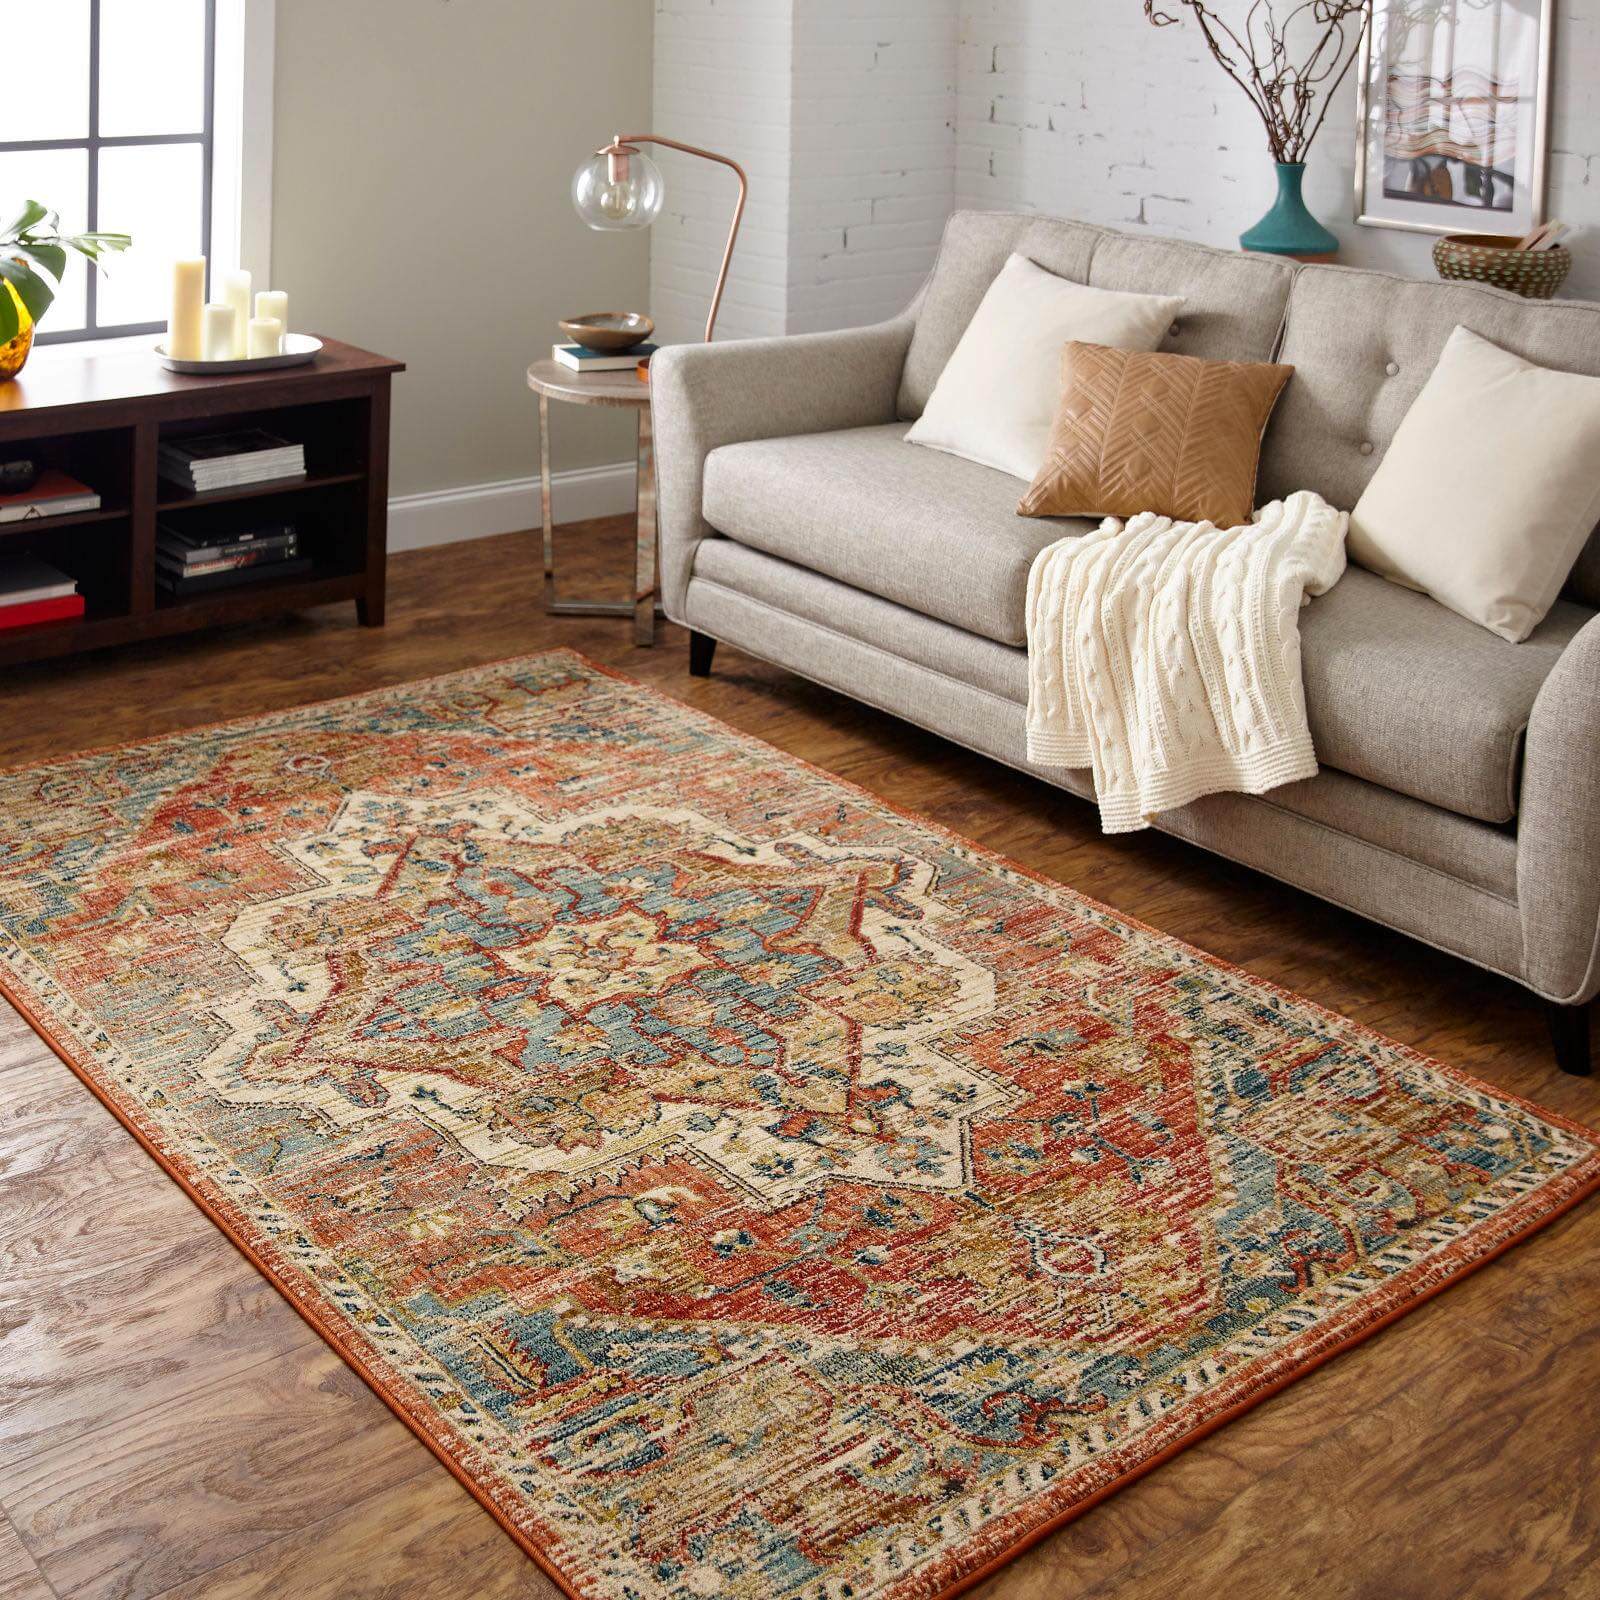 How to Select a Rug for Your Living Area in Calgary, Alberta